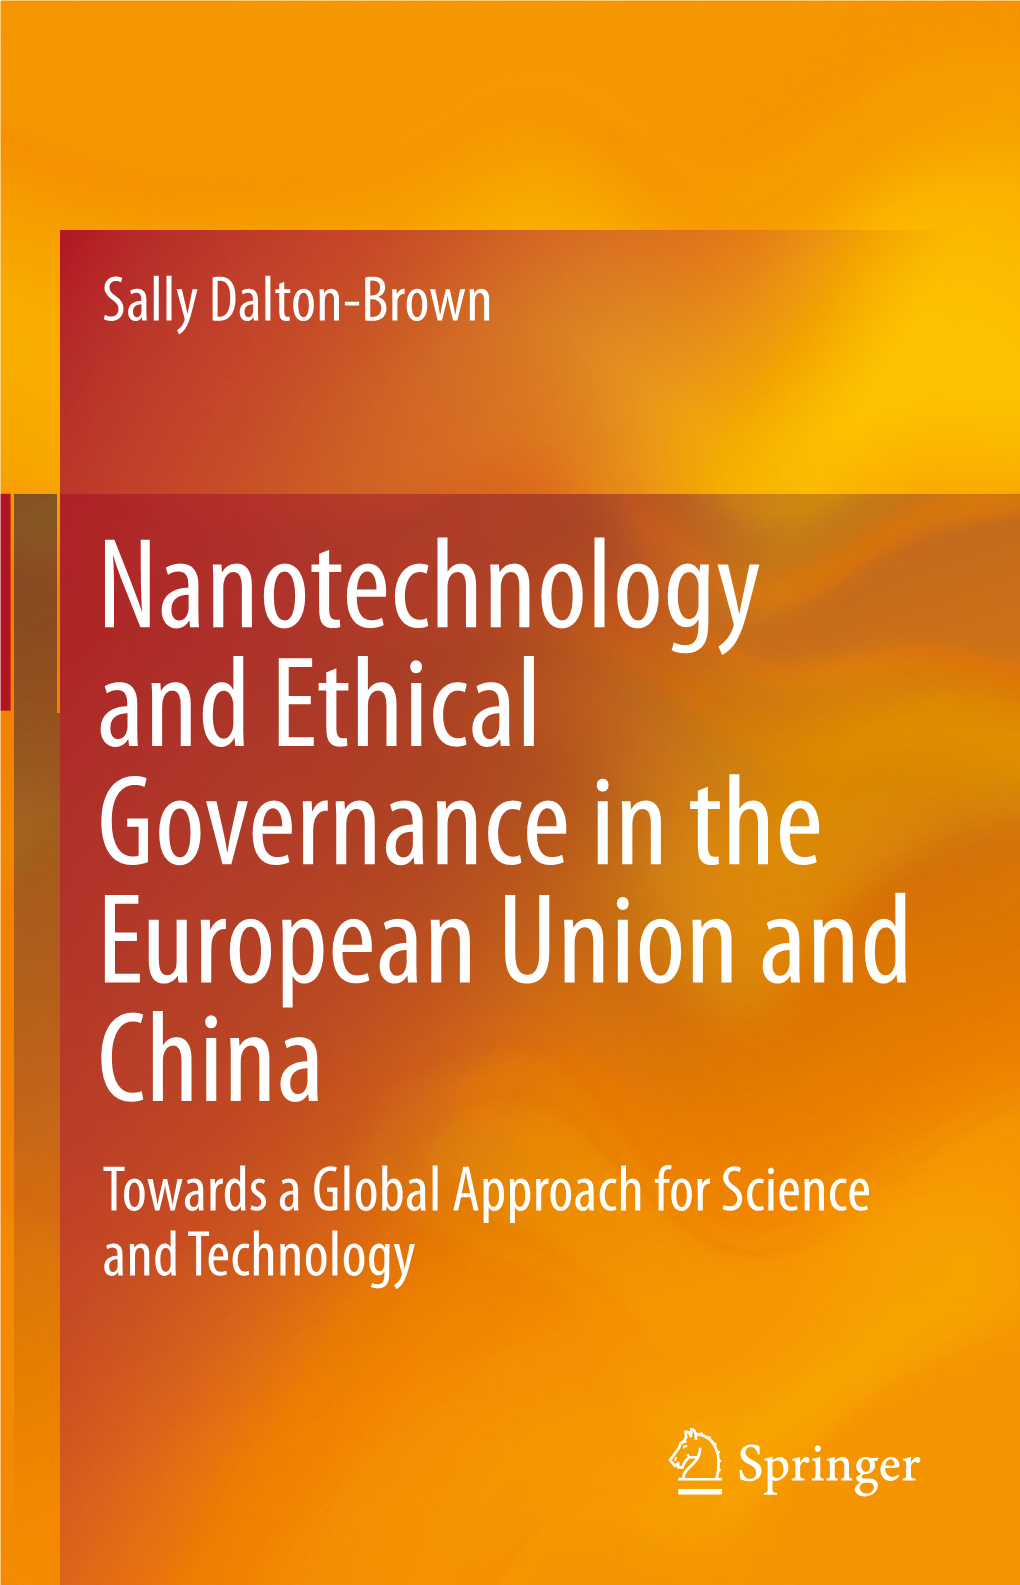 Nanotechnology and Ethical Governance in the European Union